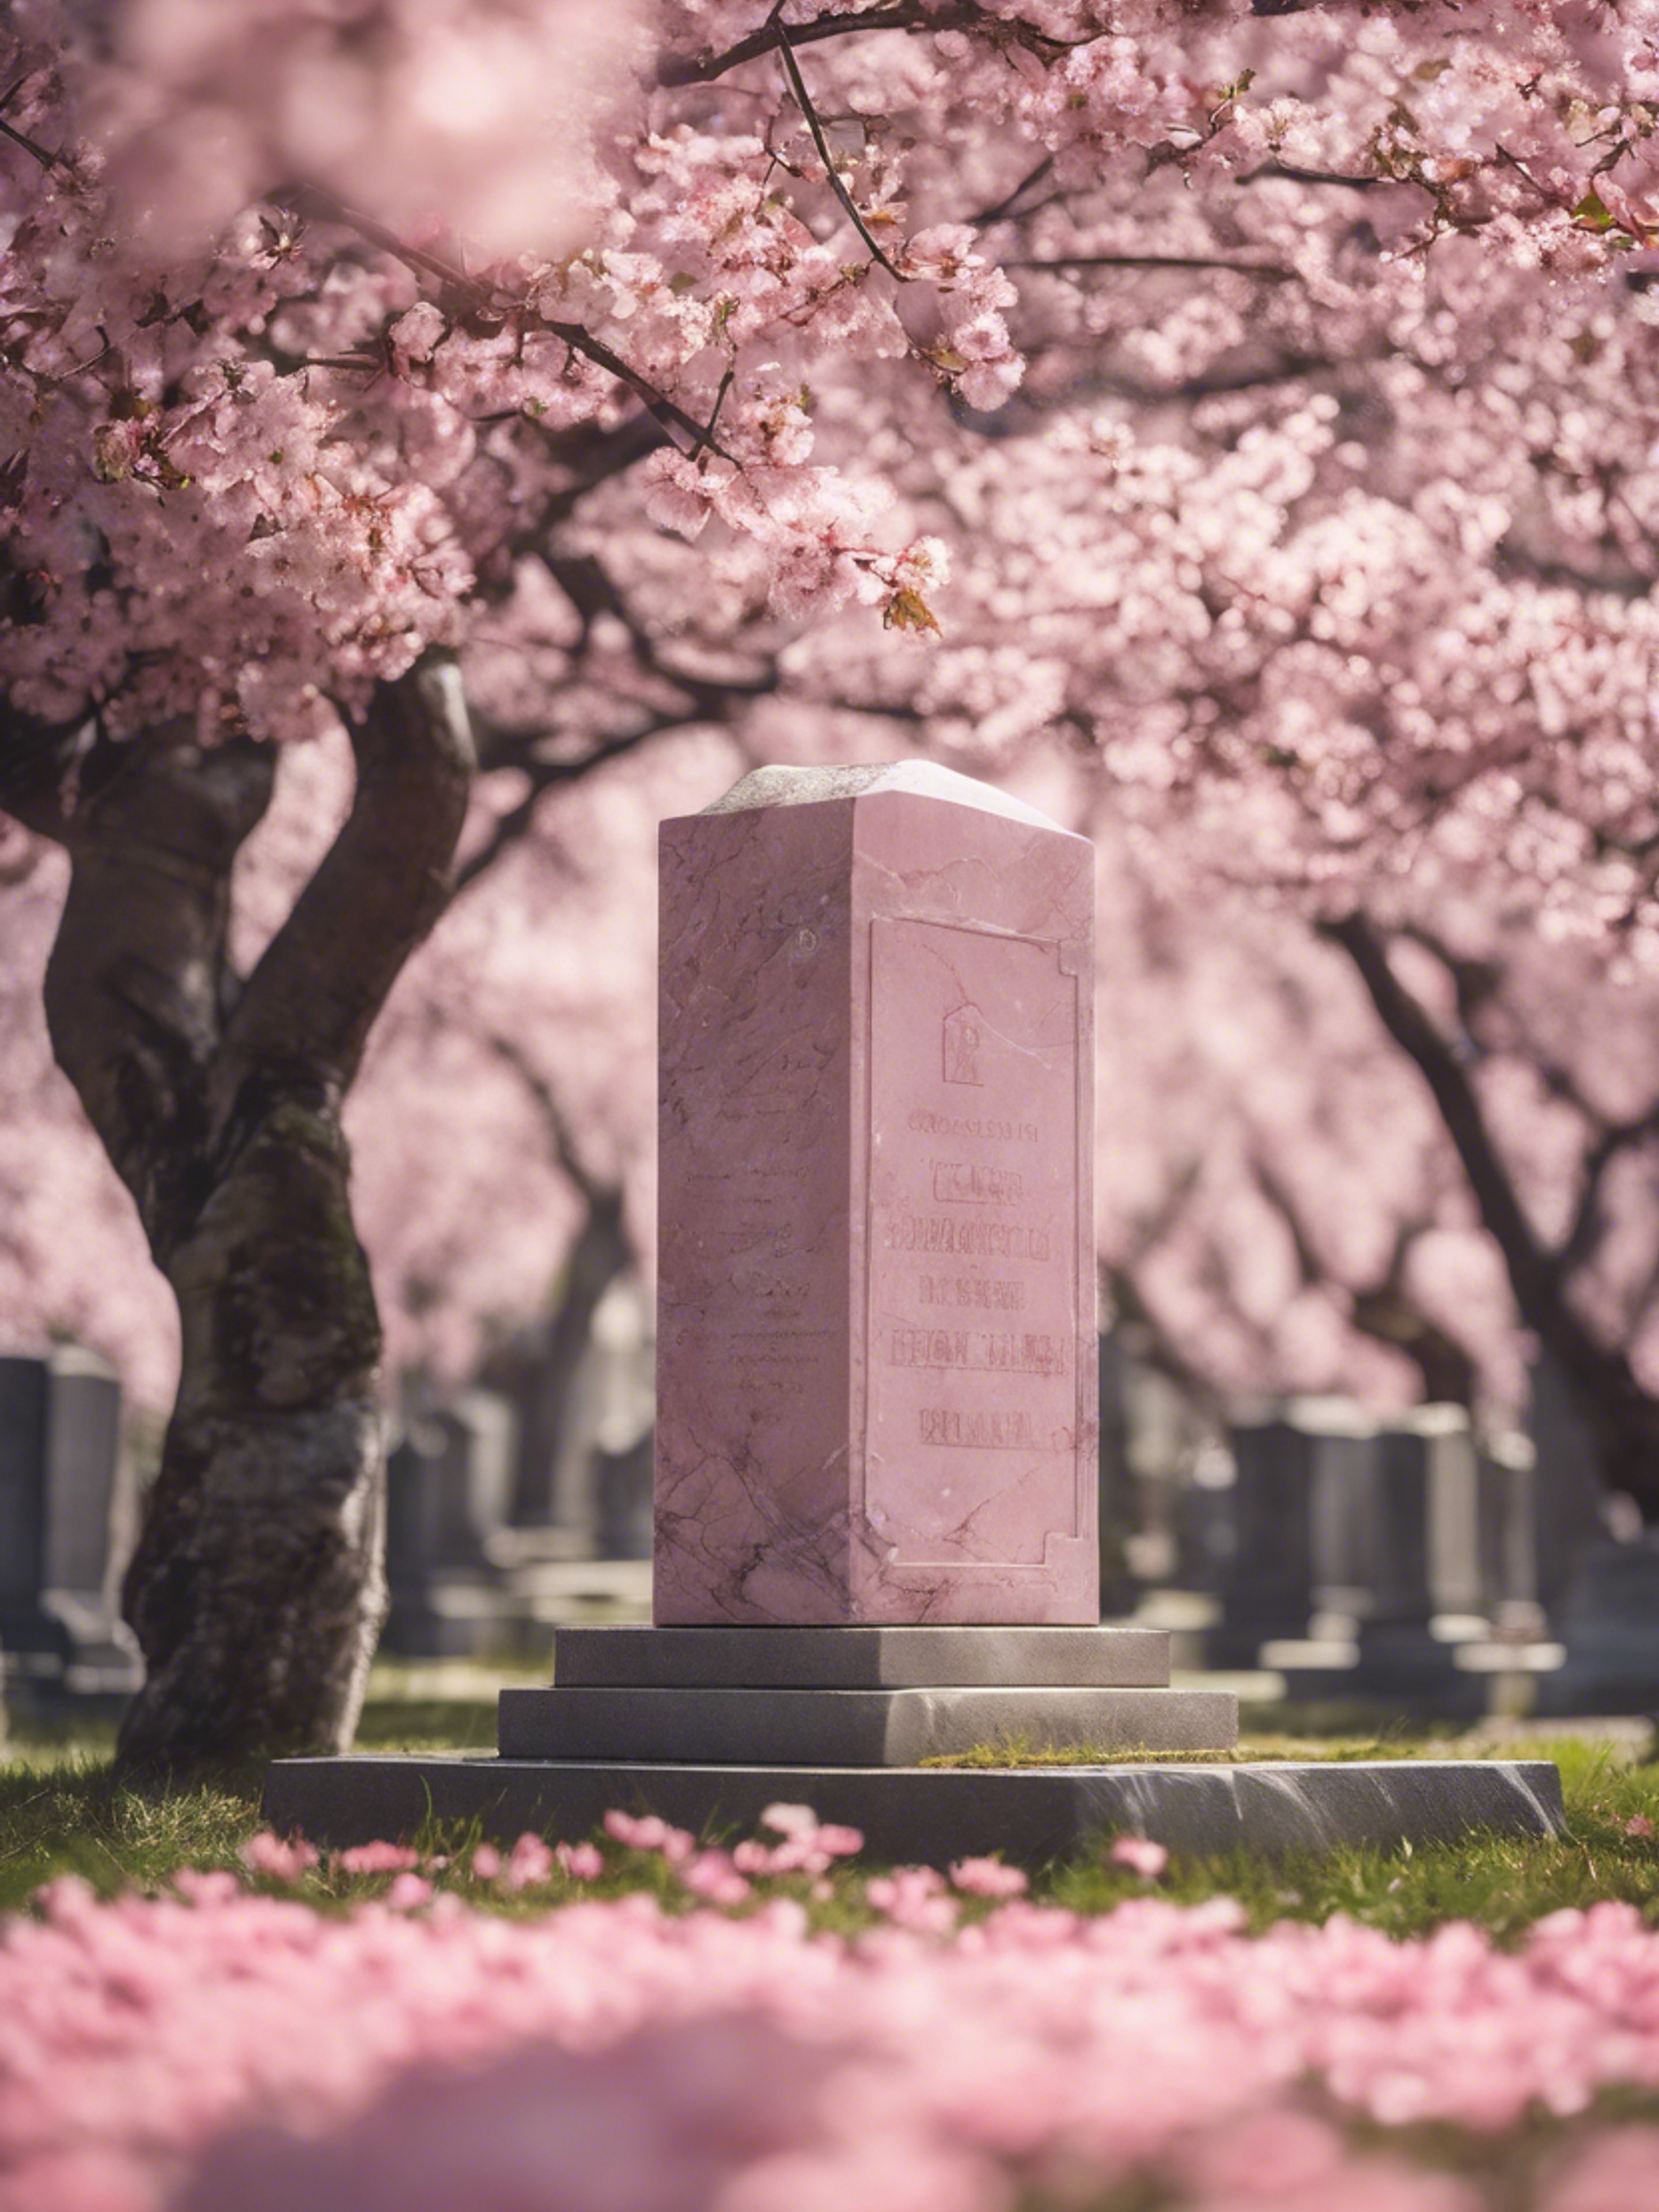 Pink marble headstone surrounded by blooming cherry blossom trees in a tranquil cemetery. Tapet[6605d21f56504ecfad88]